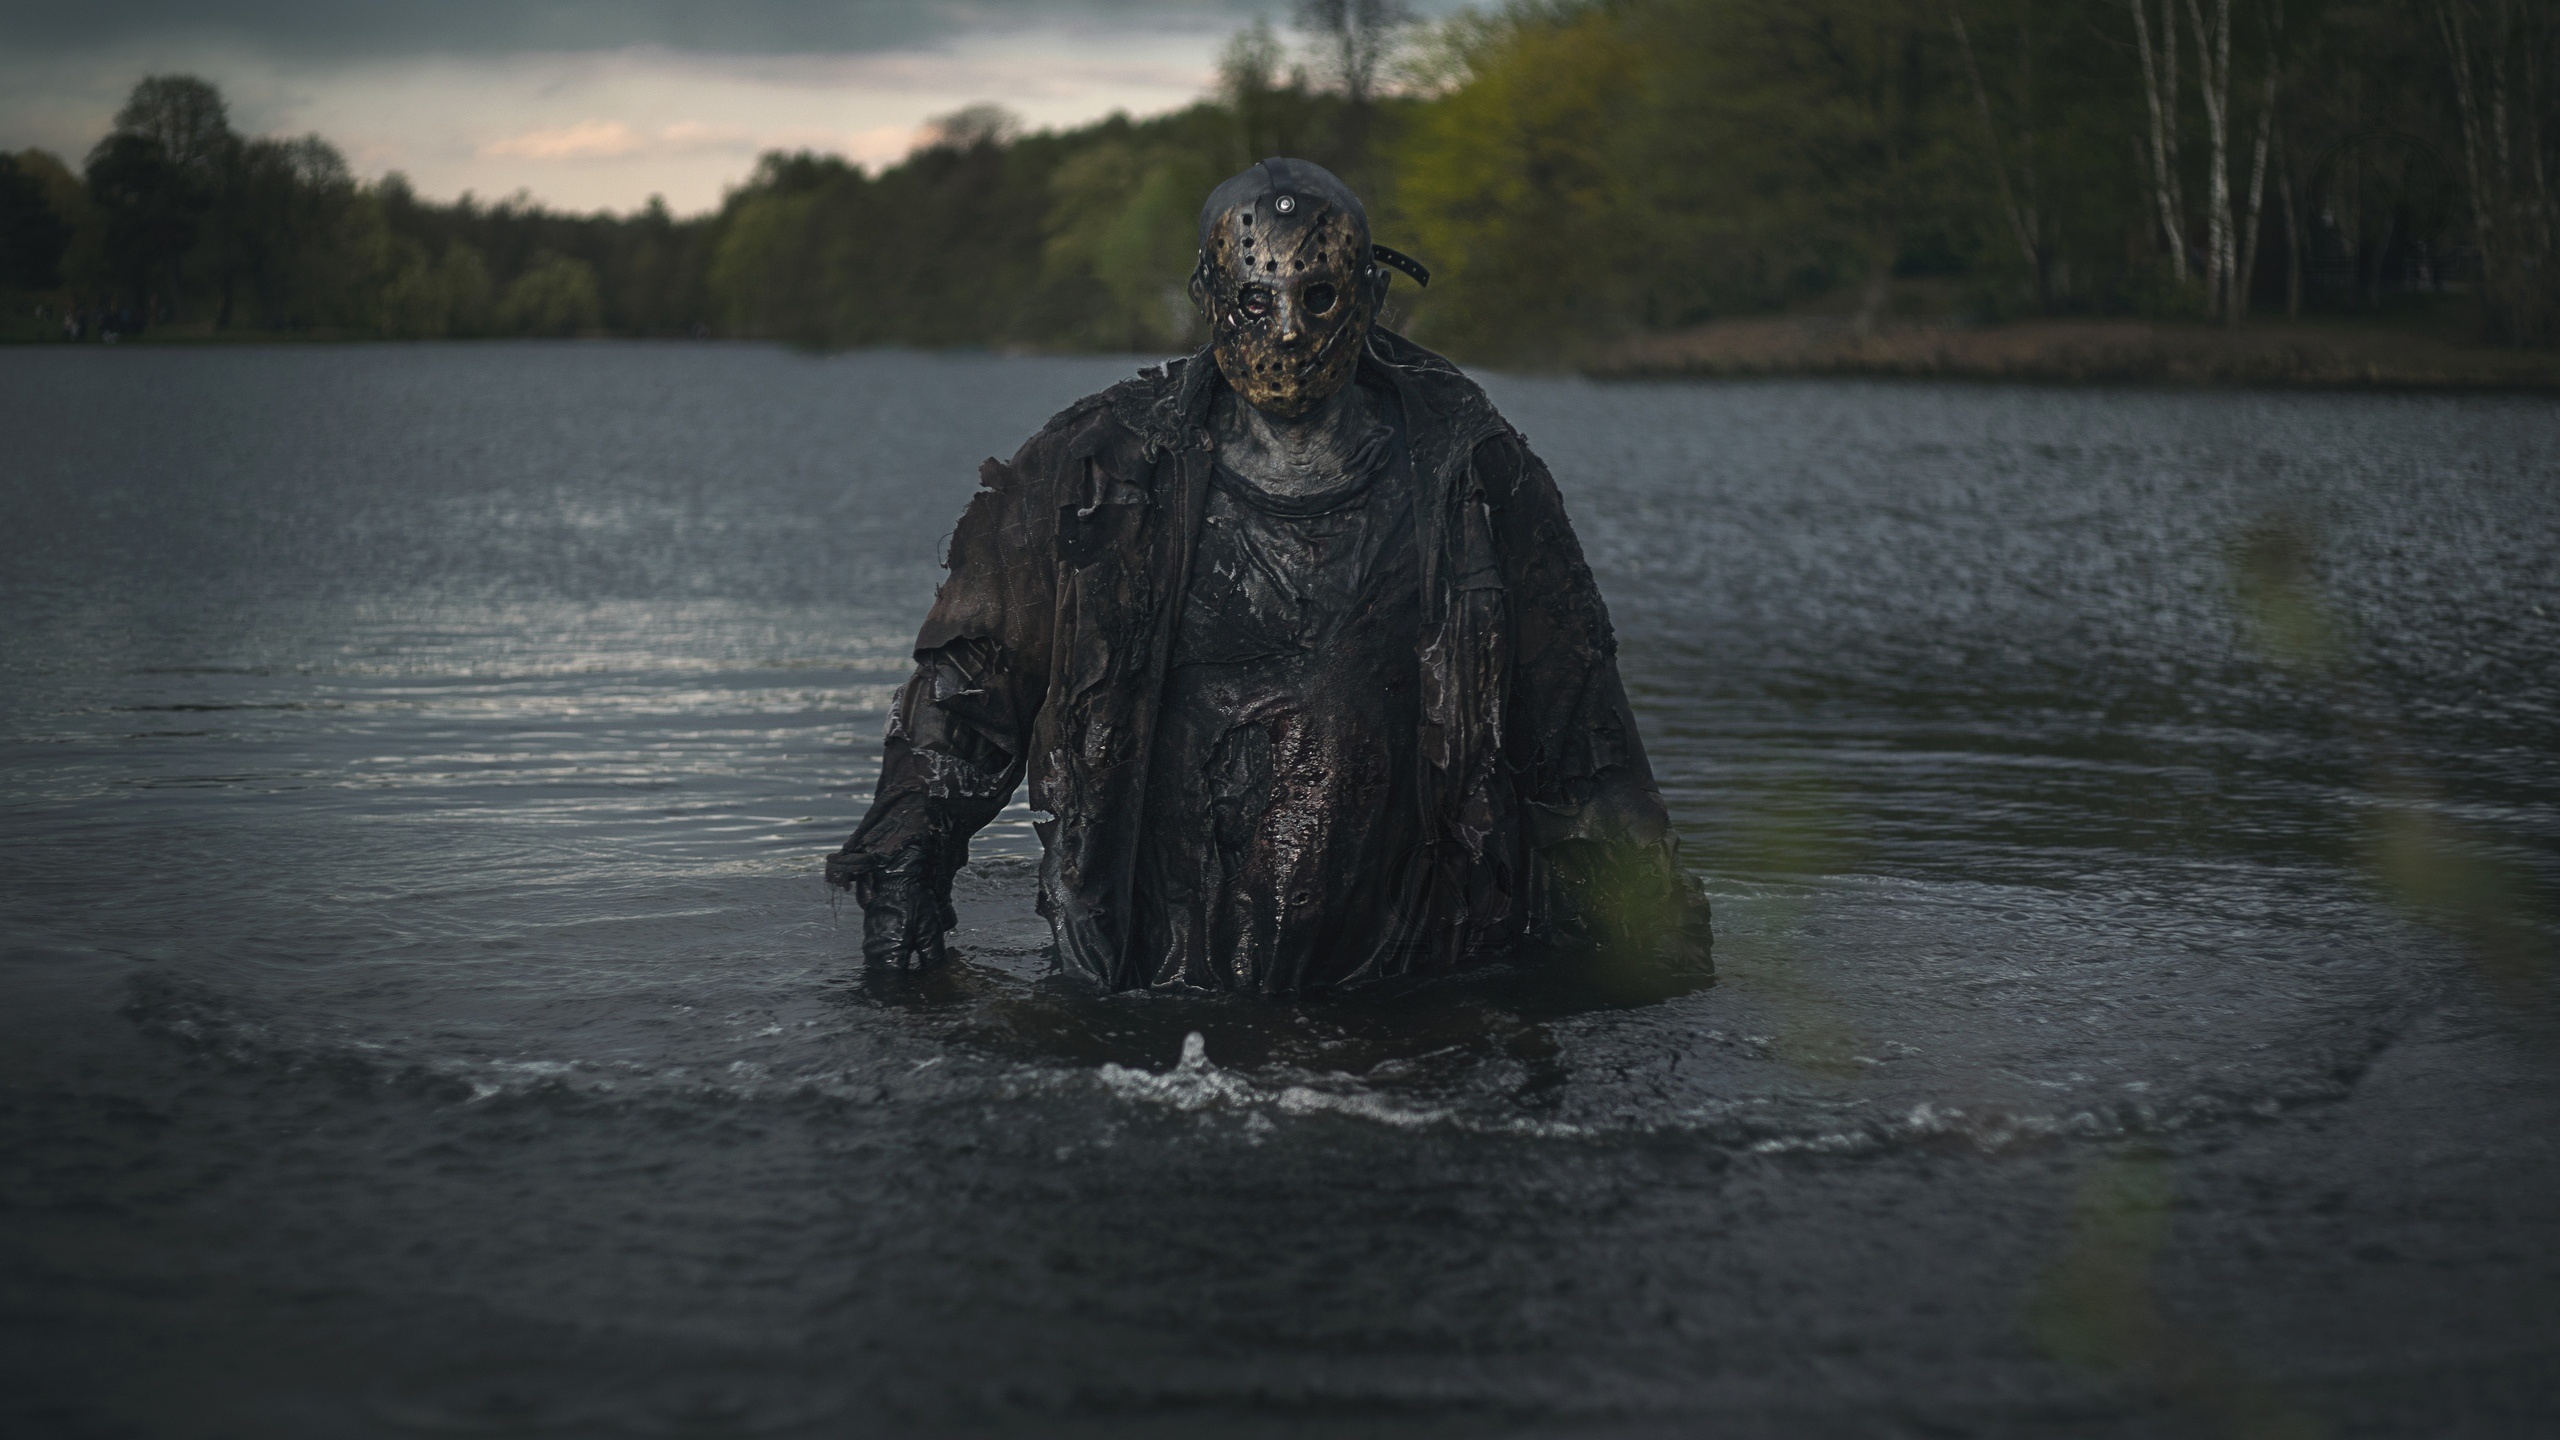 General 2560x1440 Jason Voorhees Friday the 13th movies horror mask artwork water standing in water trees looking at viewer film stills wet clothing men Freddy vs. Jason (Movie)